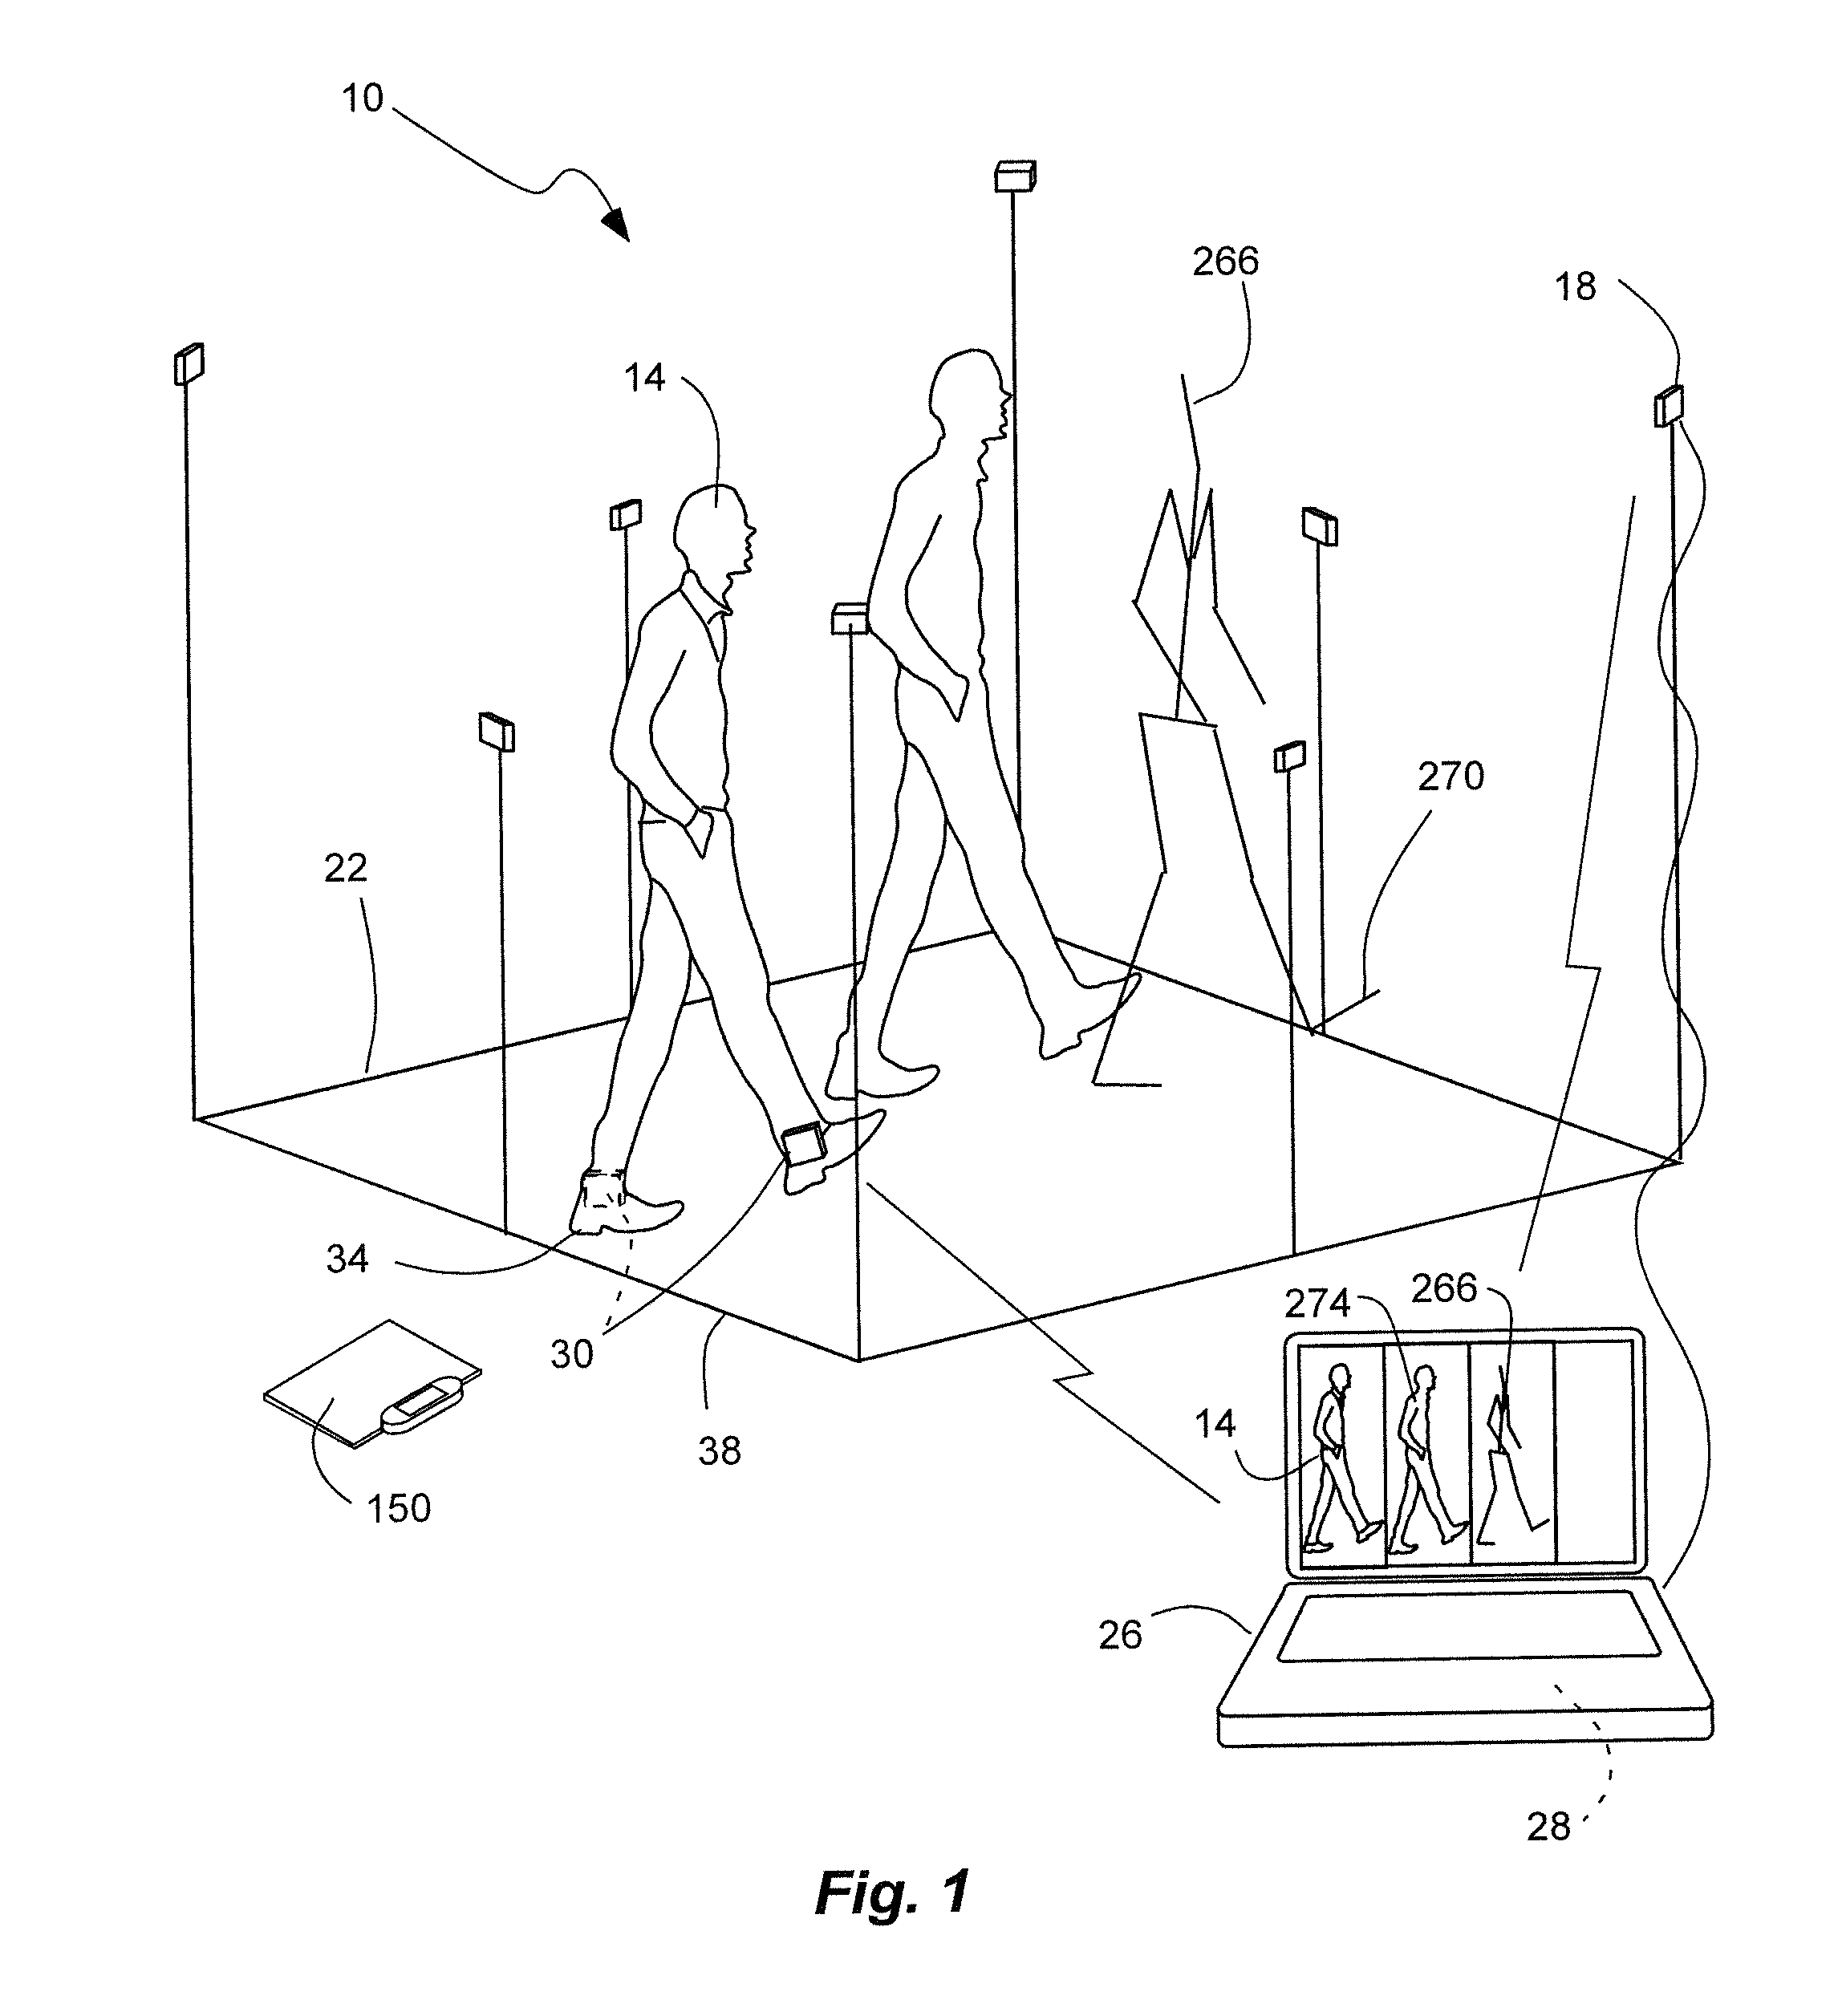 Method and System for Analyzing a Movement of a Person